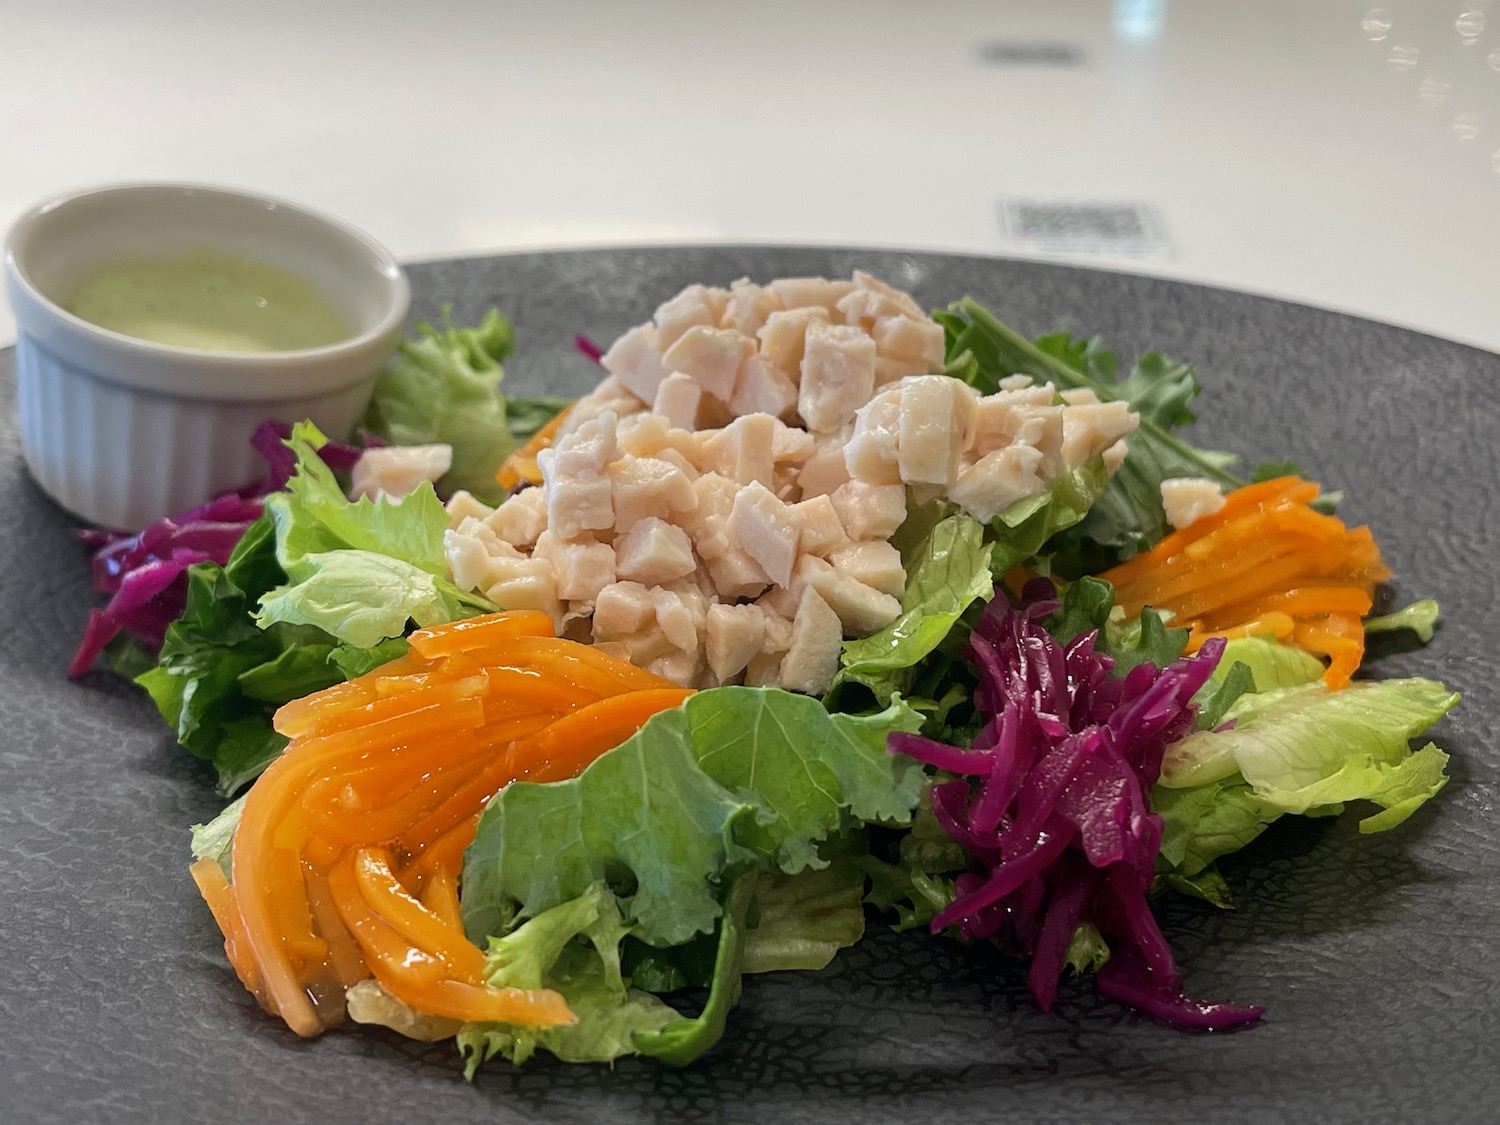 a plate of salad with a sauce